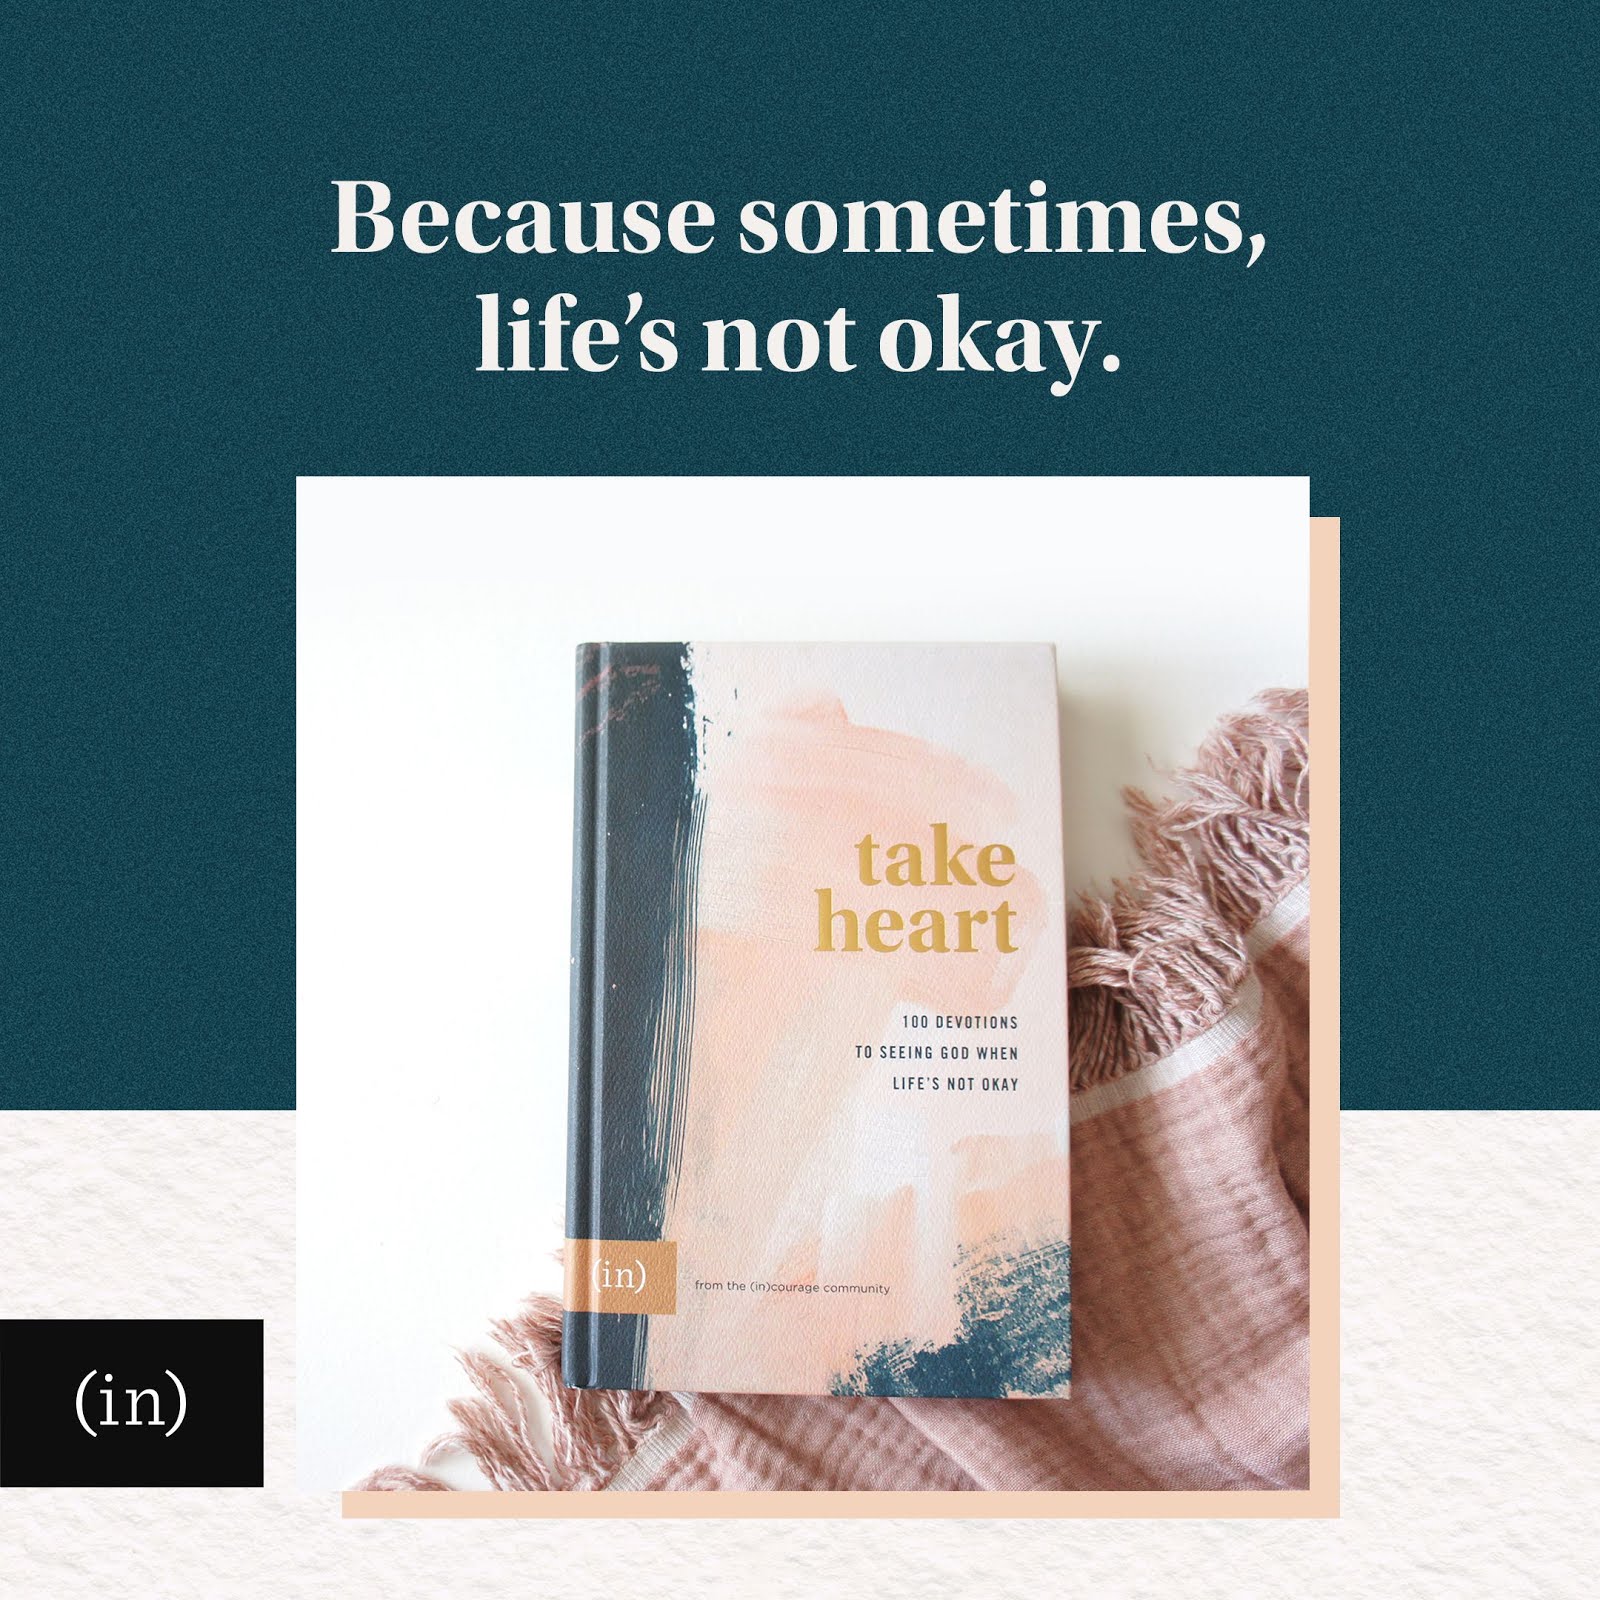 Take Heart: 100 devotions to seeing God when life's not okay